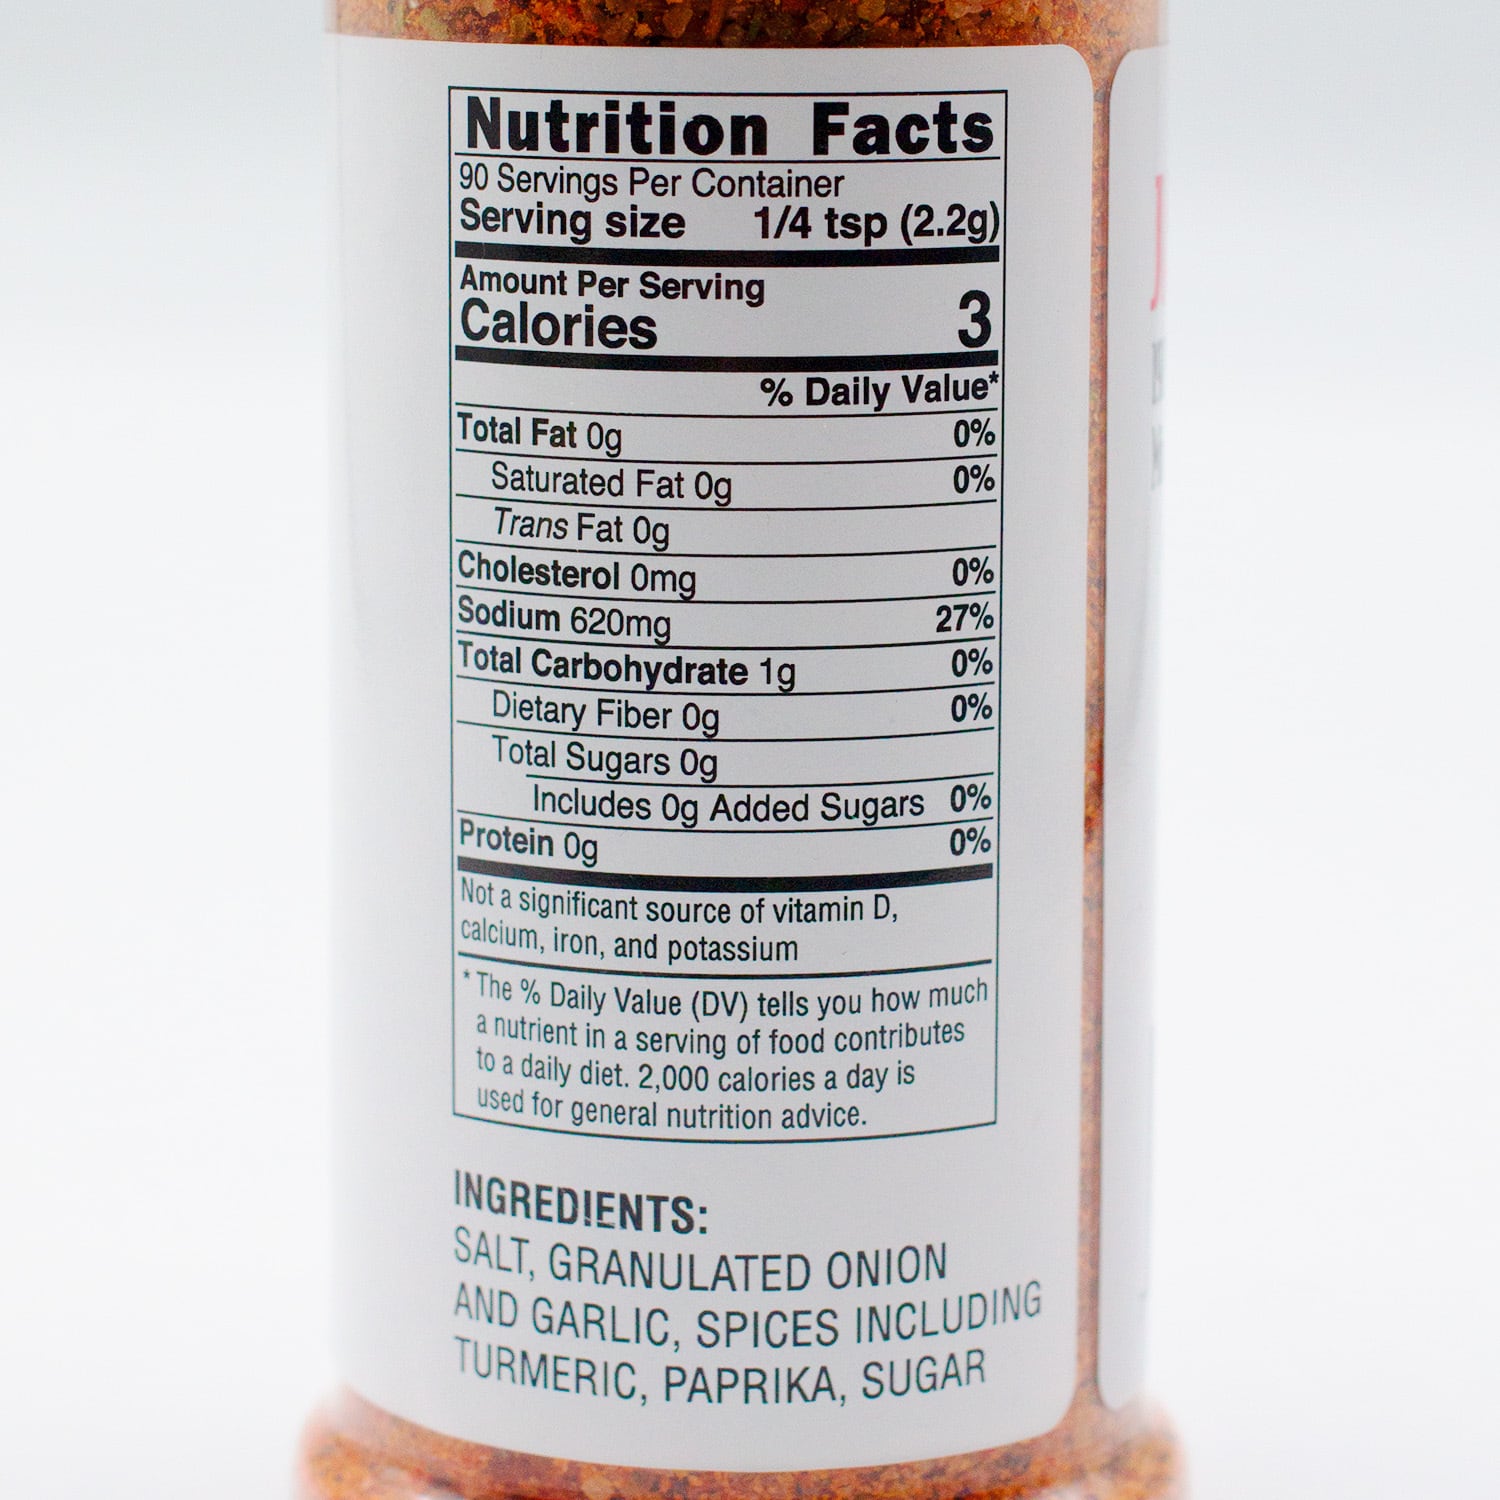 Nutrition facts label for a seasoning product. There are 90 servings per container, with a serving size of 1/4 teaspoon (2.2 grams). Each serving contains 3 calories. The product contains no fat, cholesterol, sugars, or protein. It has 620 milligrams of sodium, which is 27% of the daily value. The label notes that the product is not a significant source of vitamin D, calcium, iron, and potassium. Ingredients include salt, granulated onion and garlic, spices including turmeric, paprika, sugar, and others.